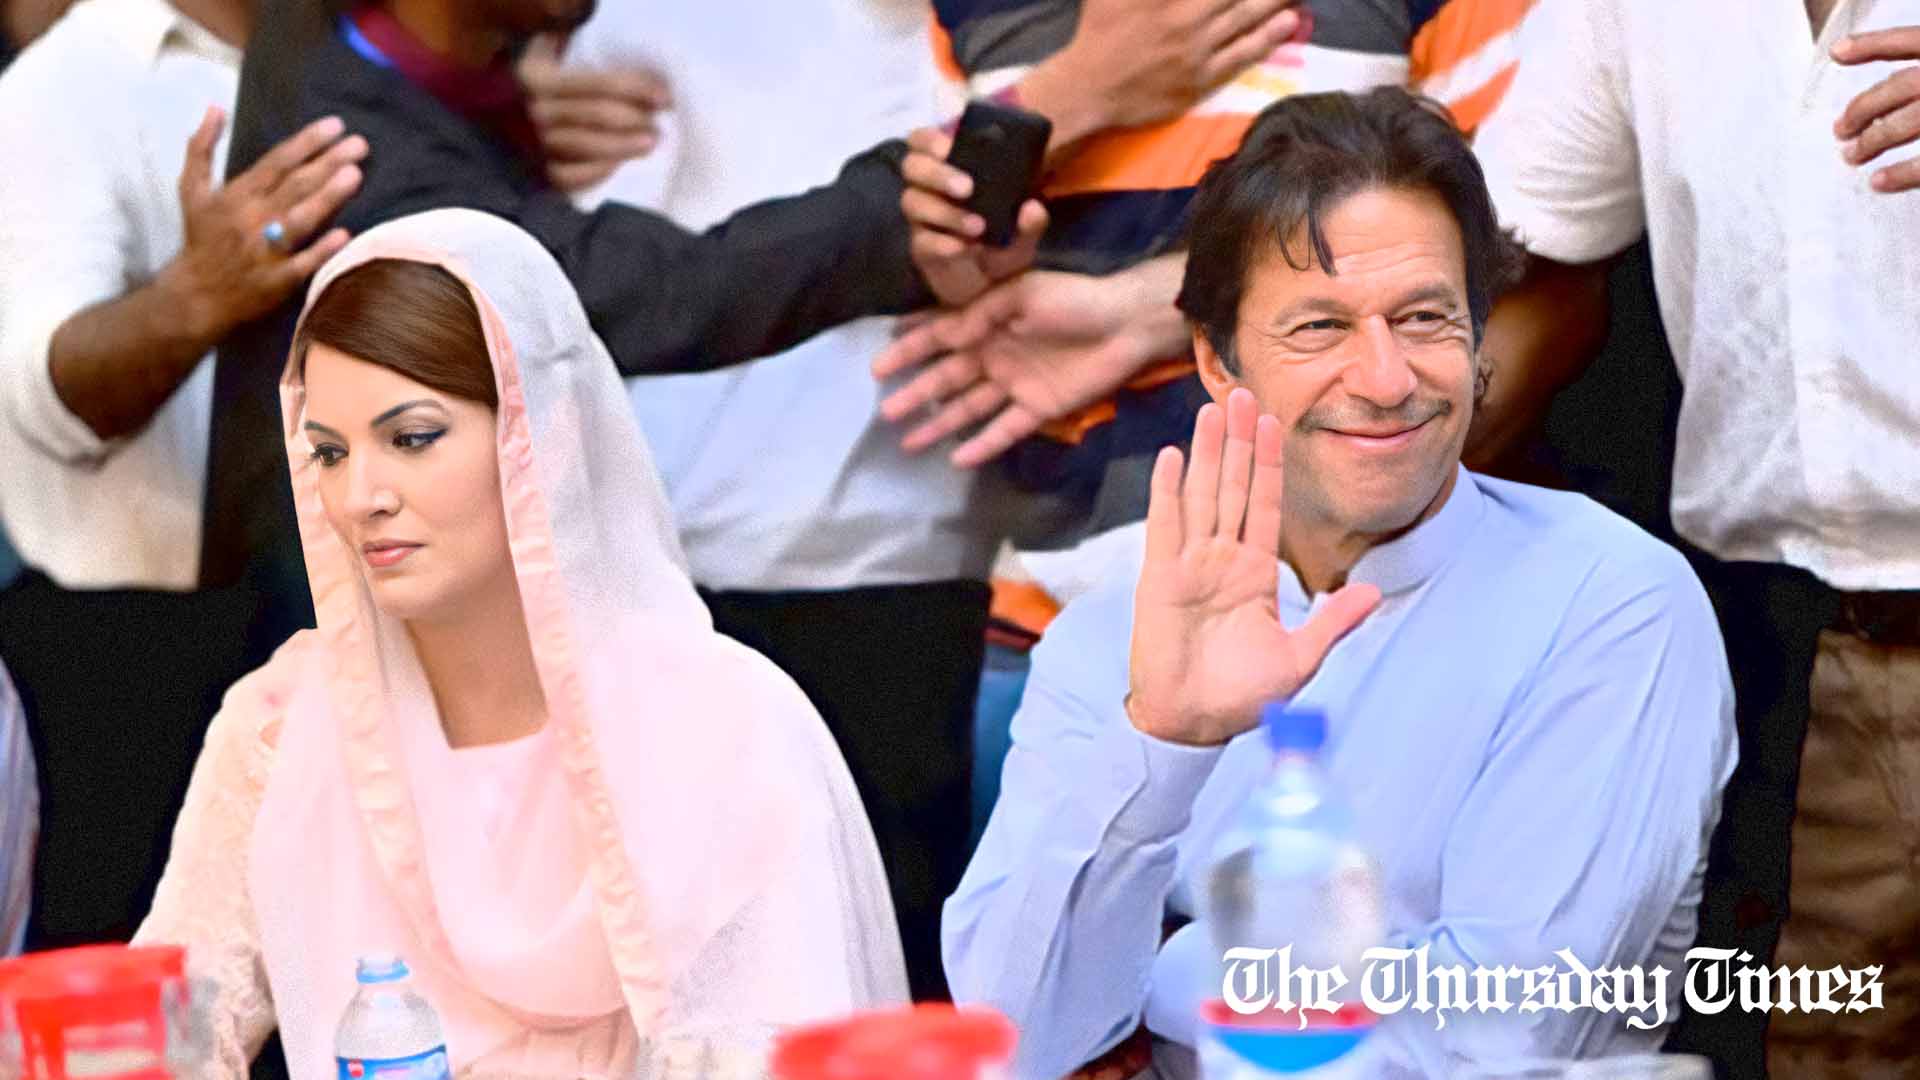 A file photo is shown of PTI chairman Imran Khan alongside his former wife, journalist Reham Khan. — FILE/THE THURSDAY TIMES